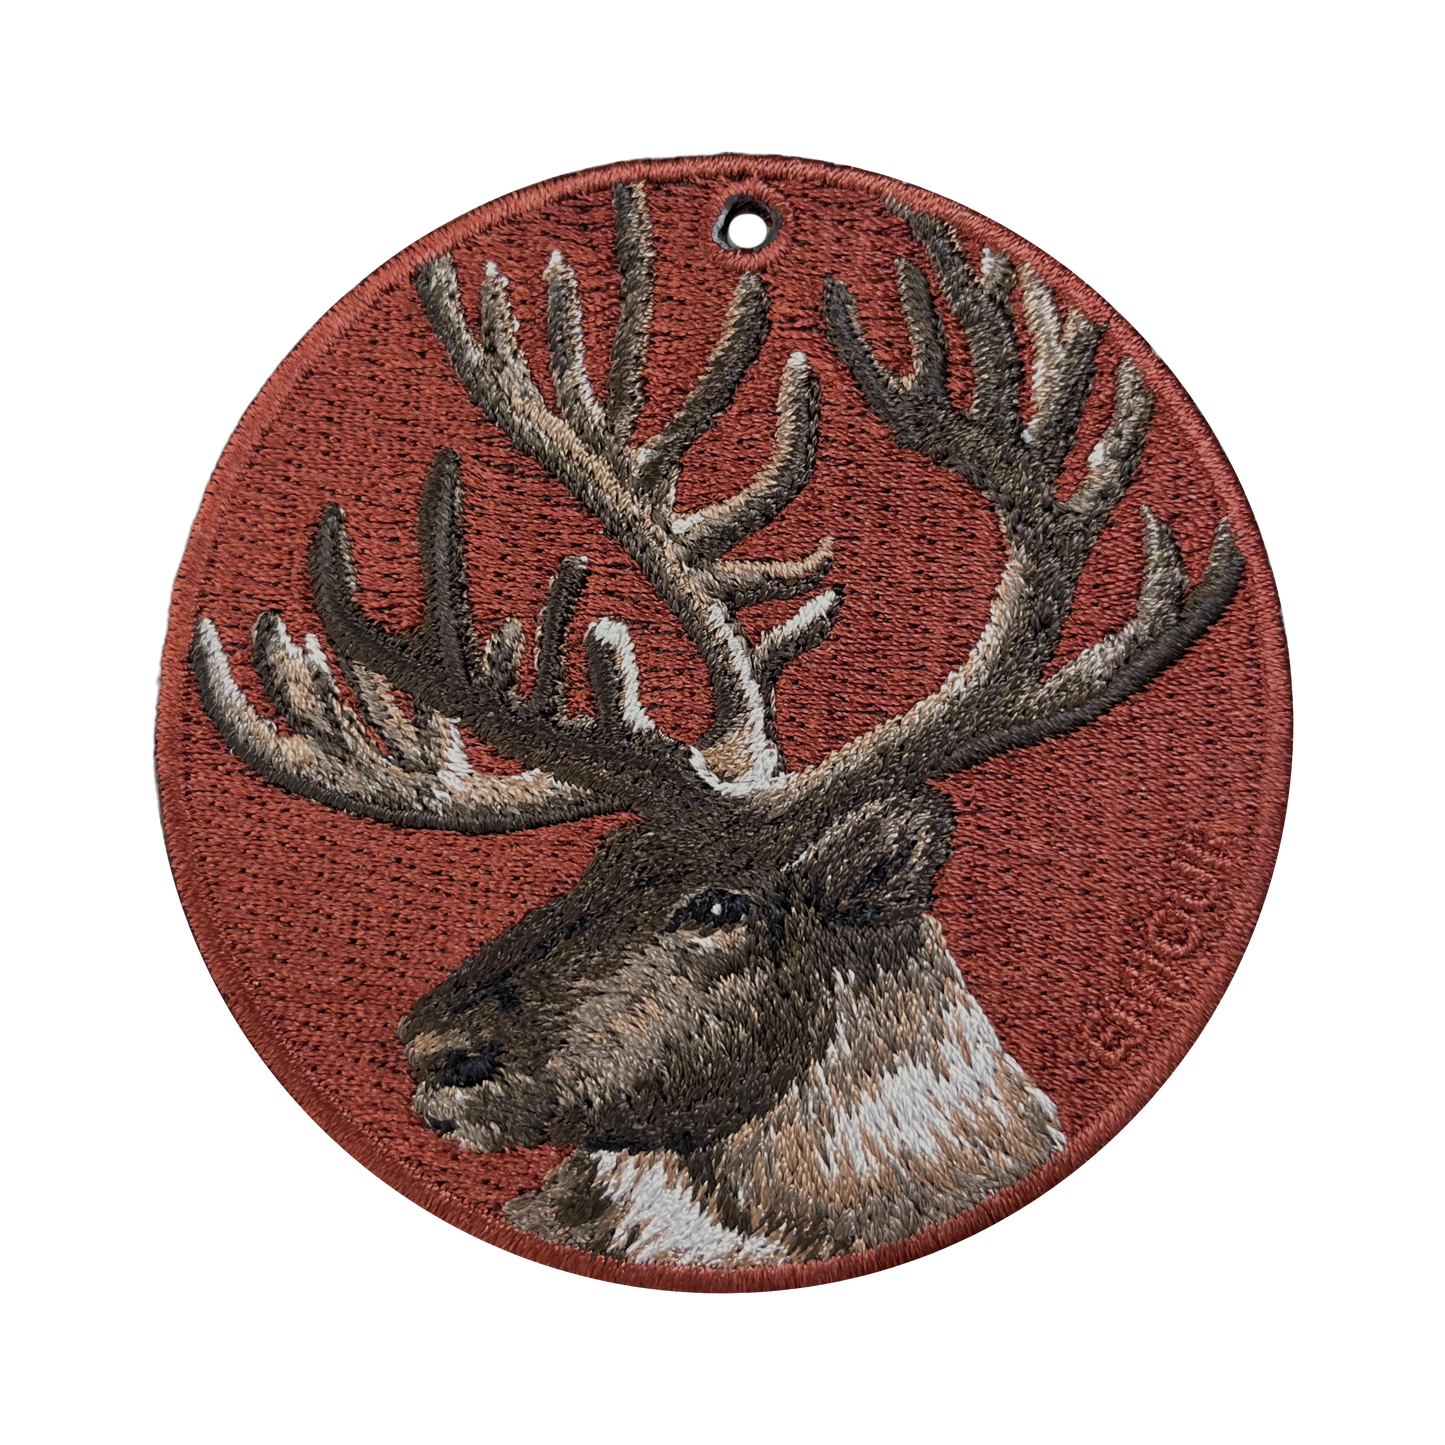 Double-sided embroidery pendant-reindeer